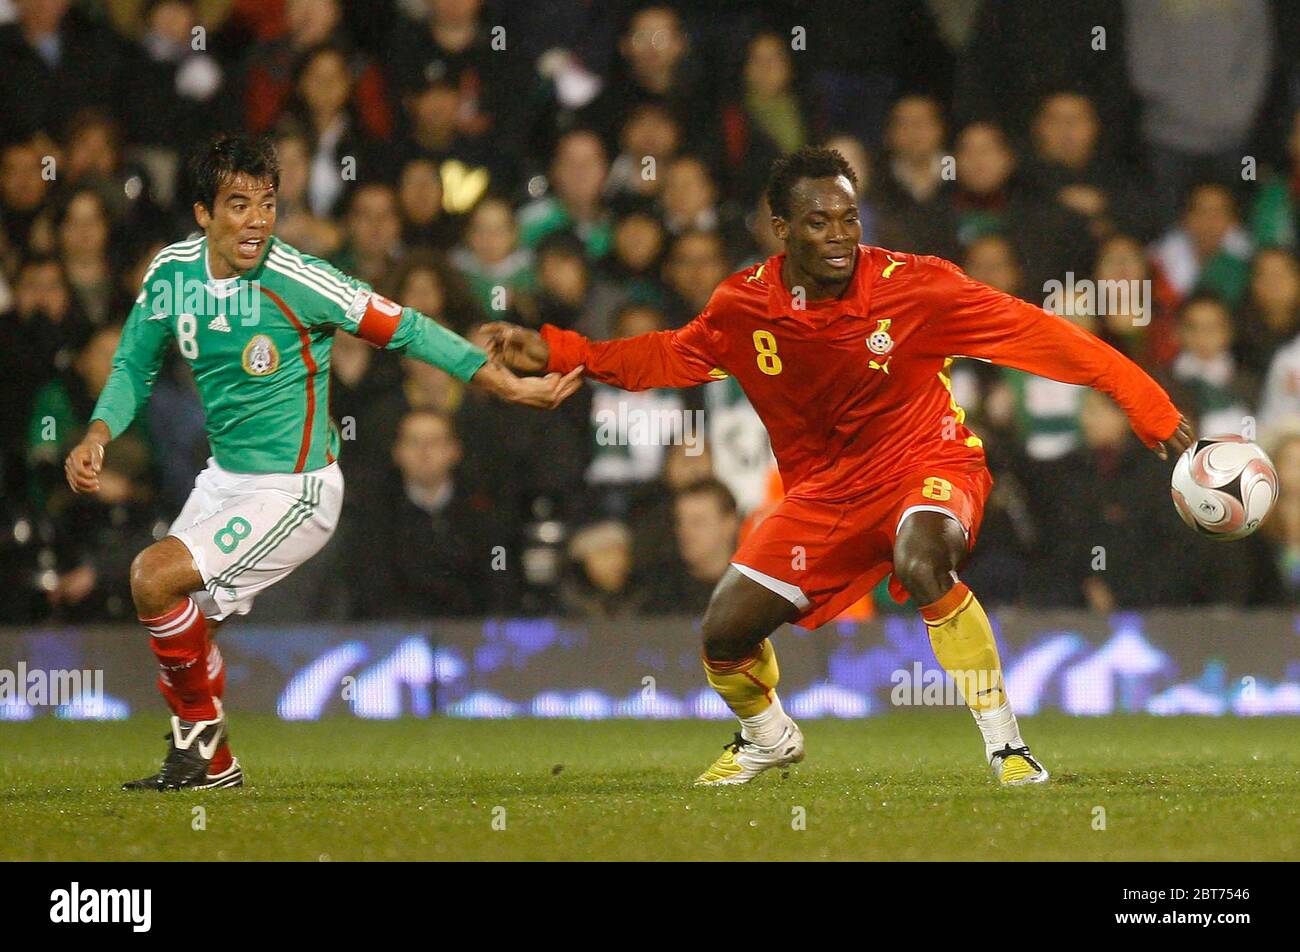 LONDON, UK. MARCH 26: Ghana's Michael Essien in action during International Friendly between Mexico City and Ghana at Craven Cottage, Fulham 26 March, Stock Photo